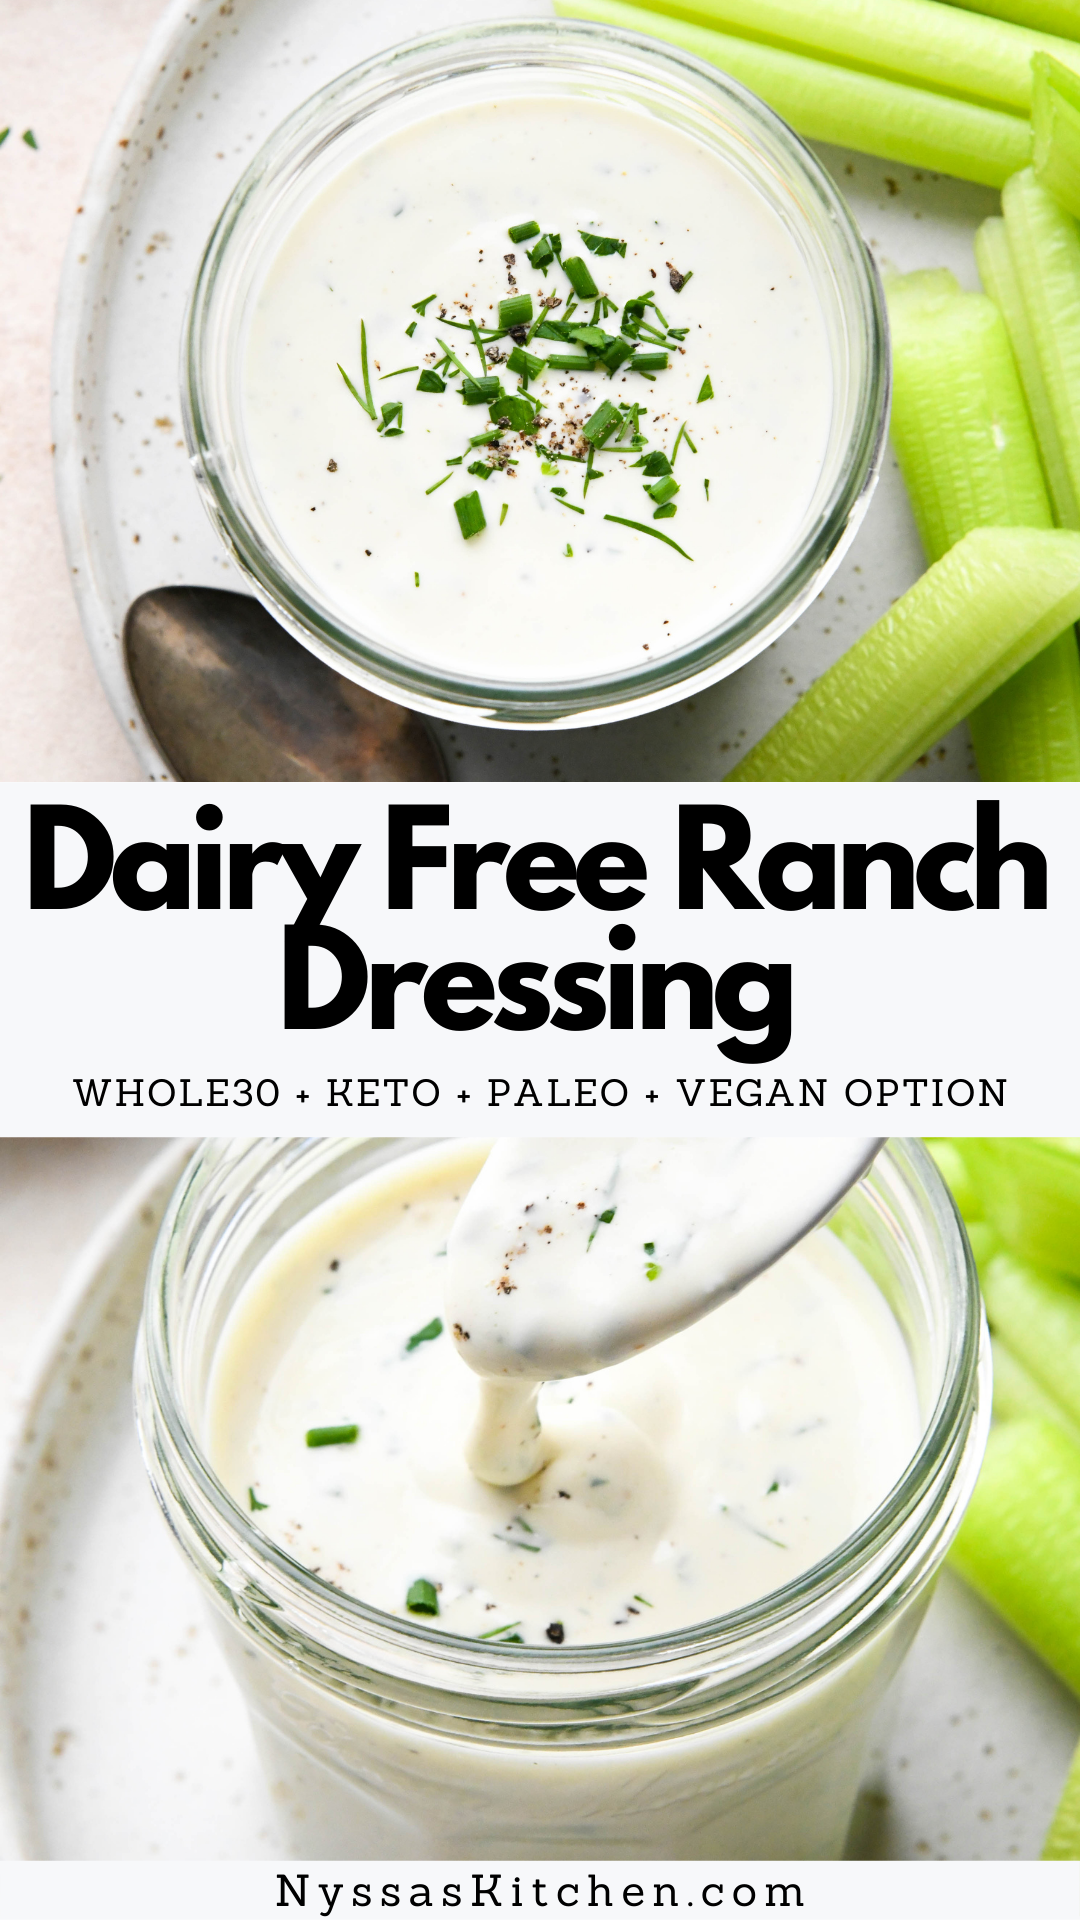 This dairy free ranch dressing is made with a few simple ingredients that you likely already have on hand. Made without milk or dairy and it's ready in less than 5 MINUTES! So delicious as a dip or a salad dressing. A healthy and tasty alternative to everyone's favorite sauce. Whole30, paleo, gluten free, dairy free, vegan option, keto, low carb.